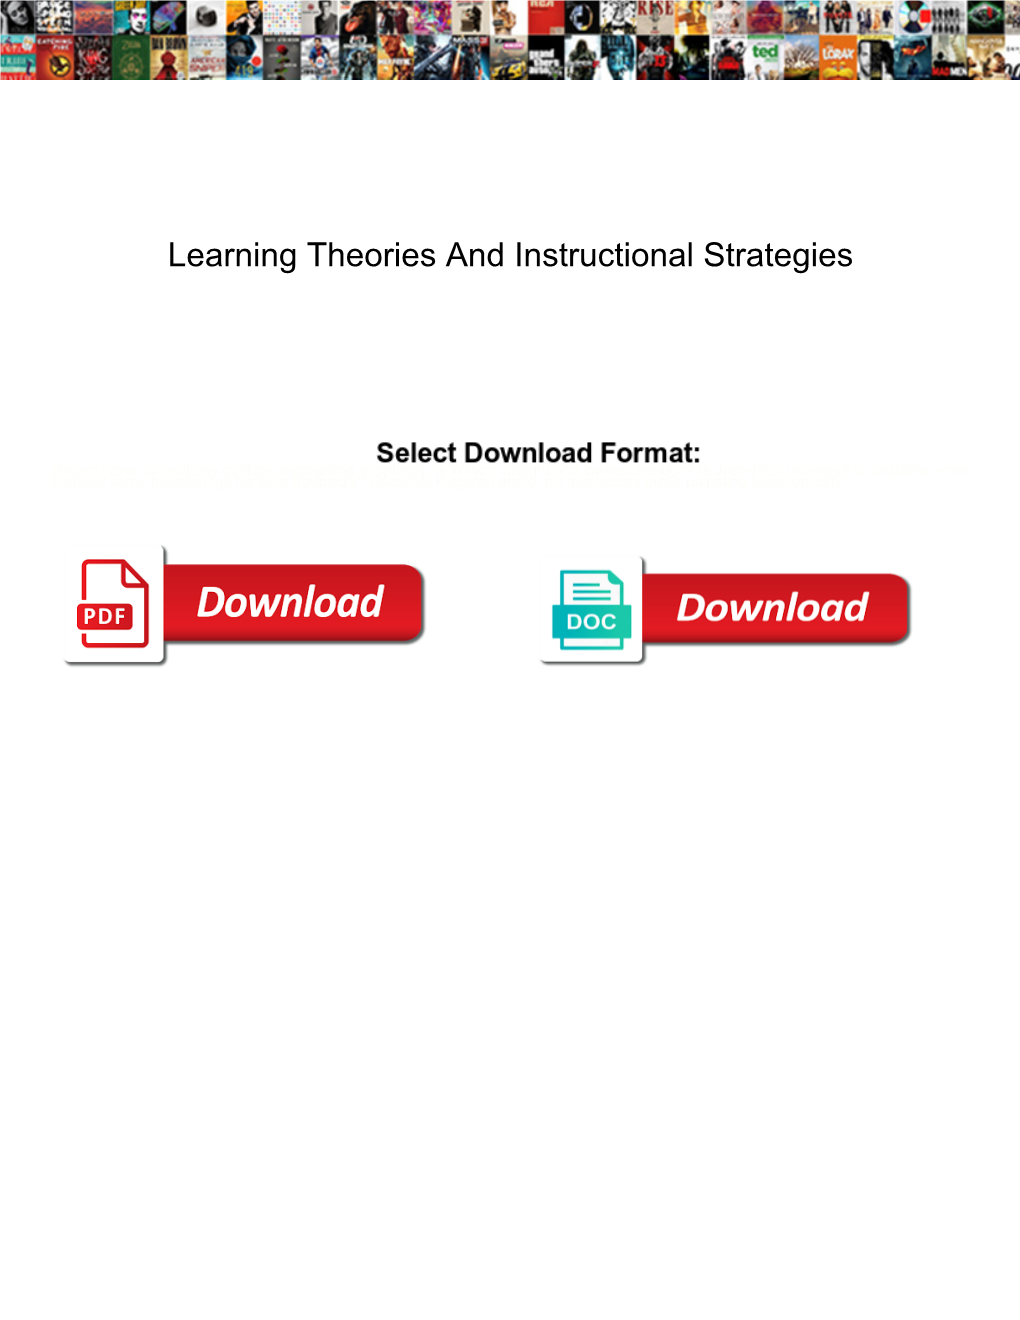 Learning Theories and Instructional Strategies